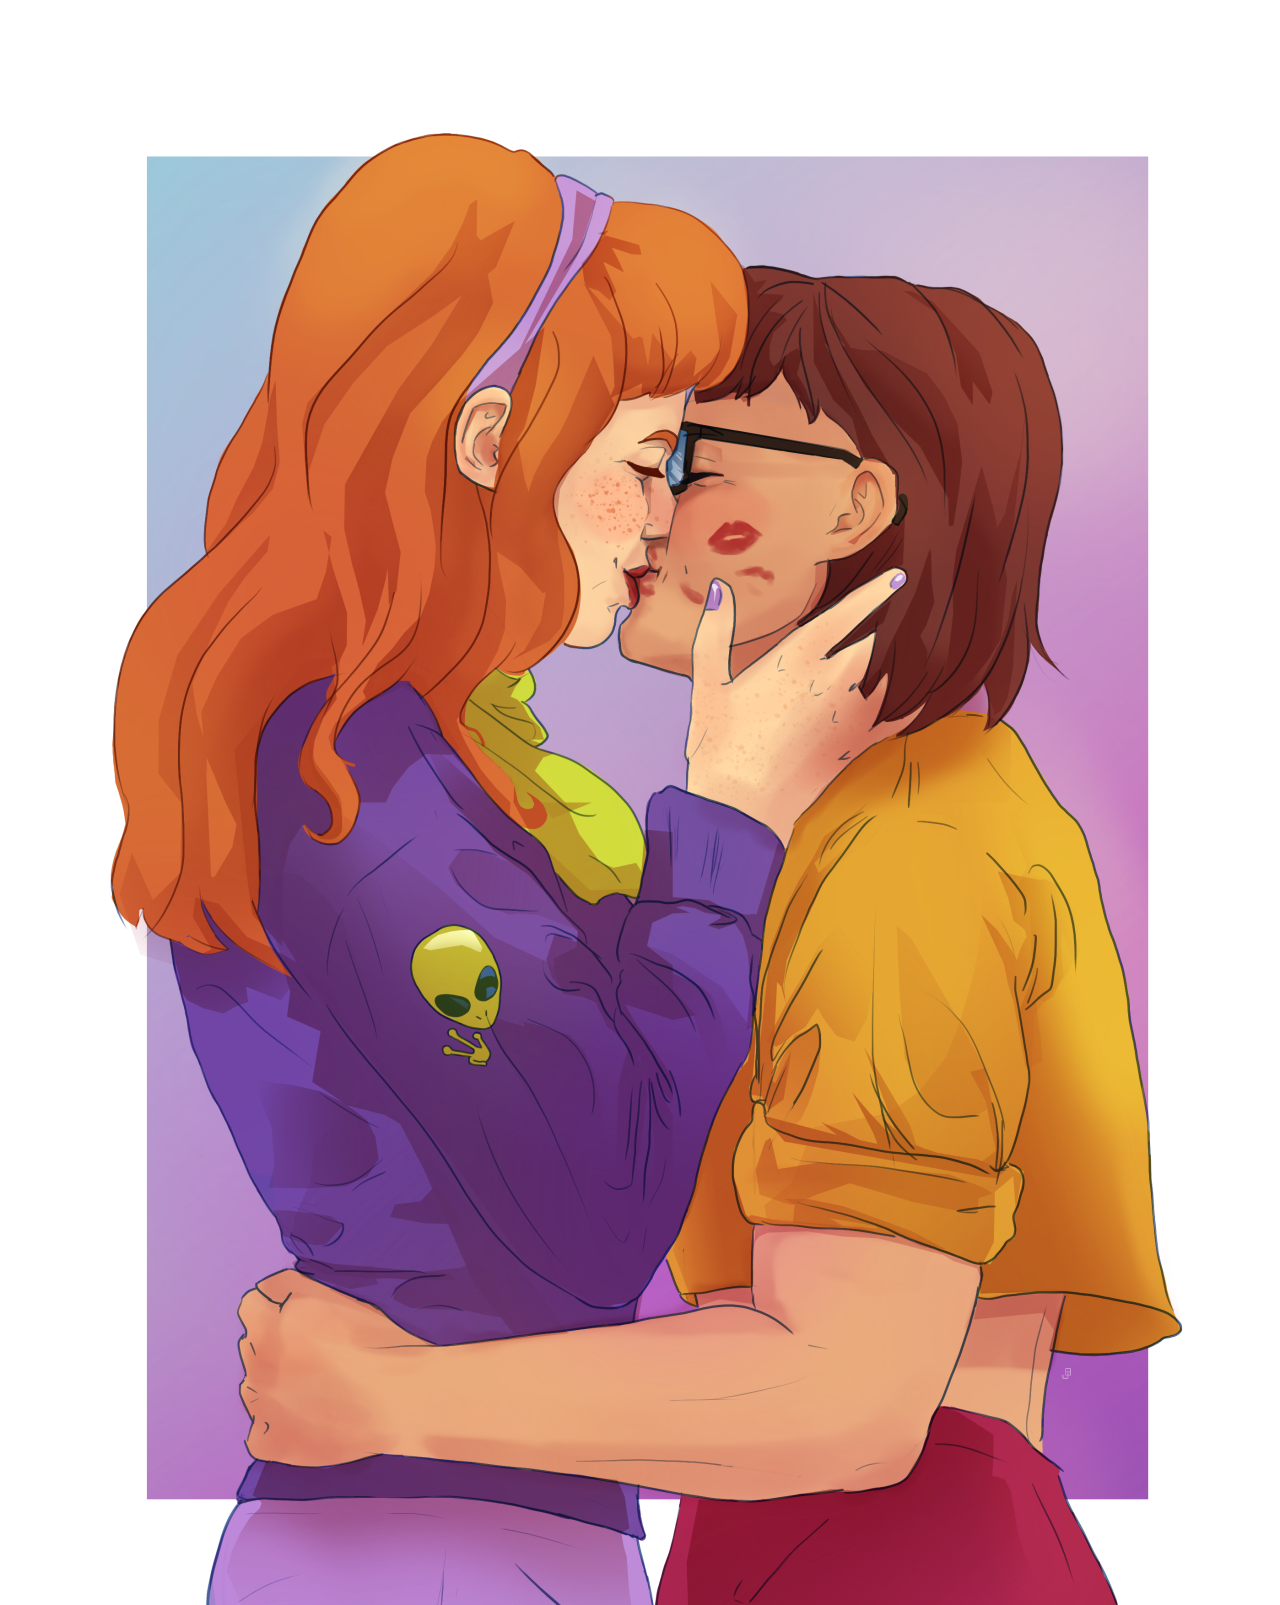 Cut Velma/Daphne Kiss in 'Scooby-Doo' Could Have Meant a Lot for LGBTQIA+  Millennials